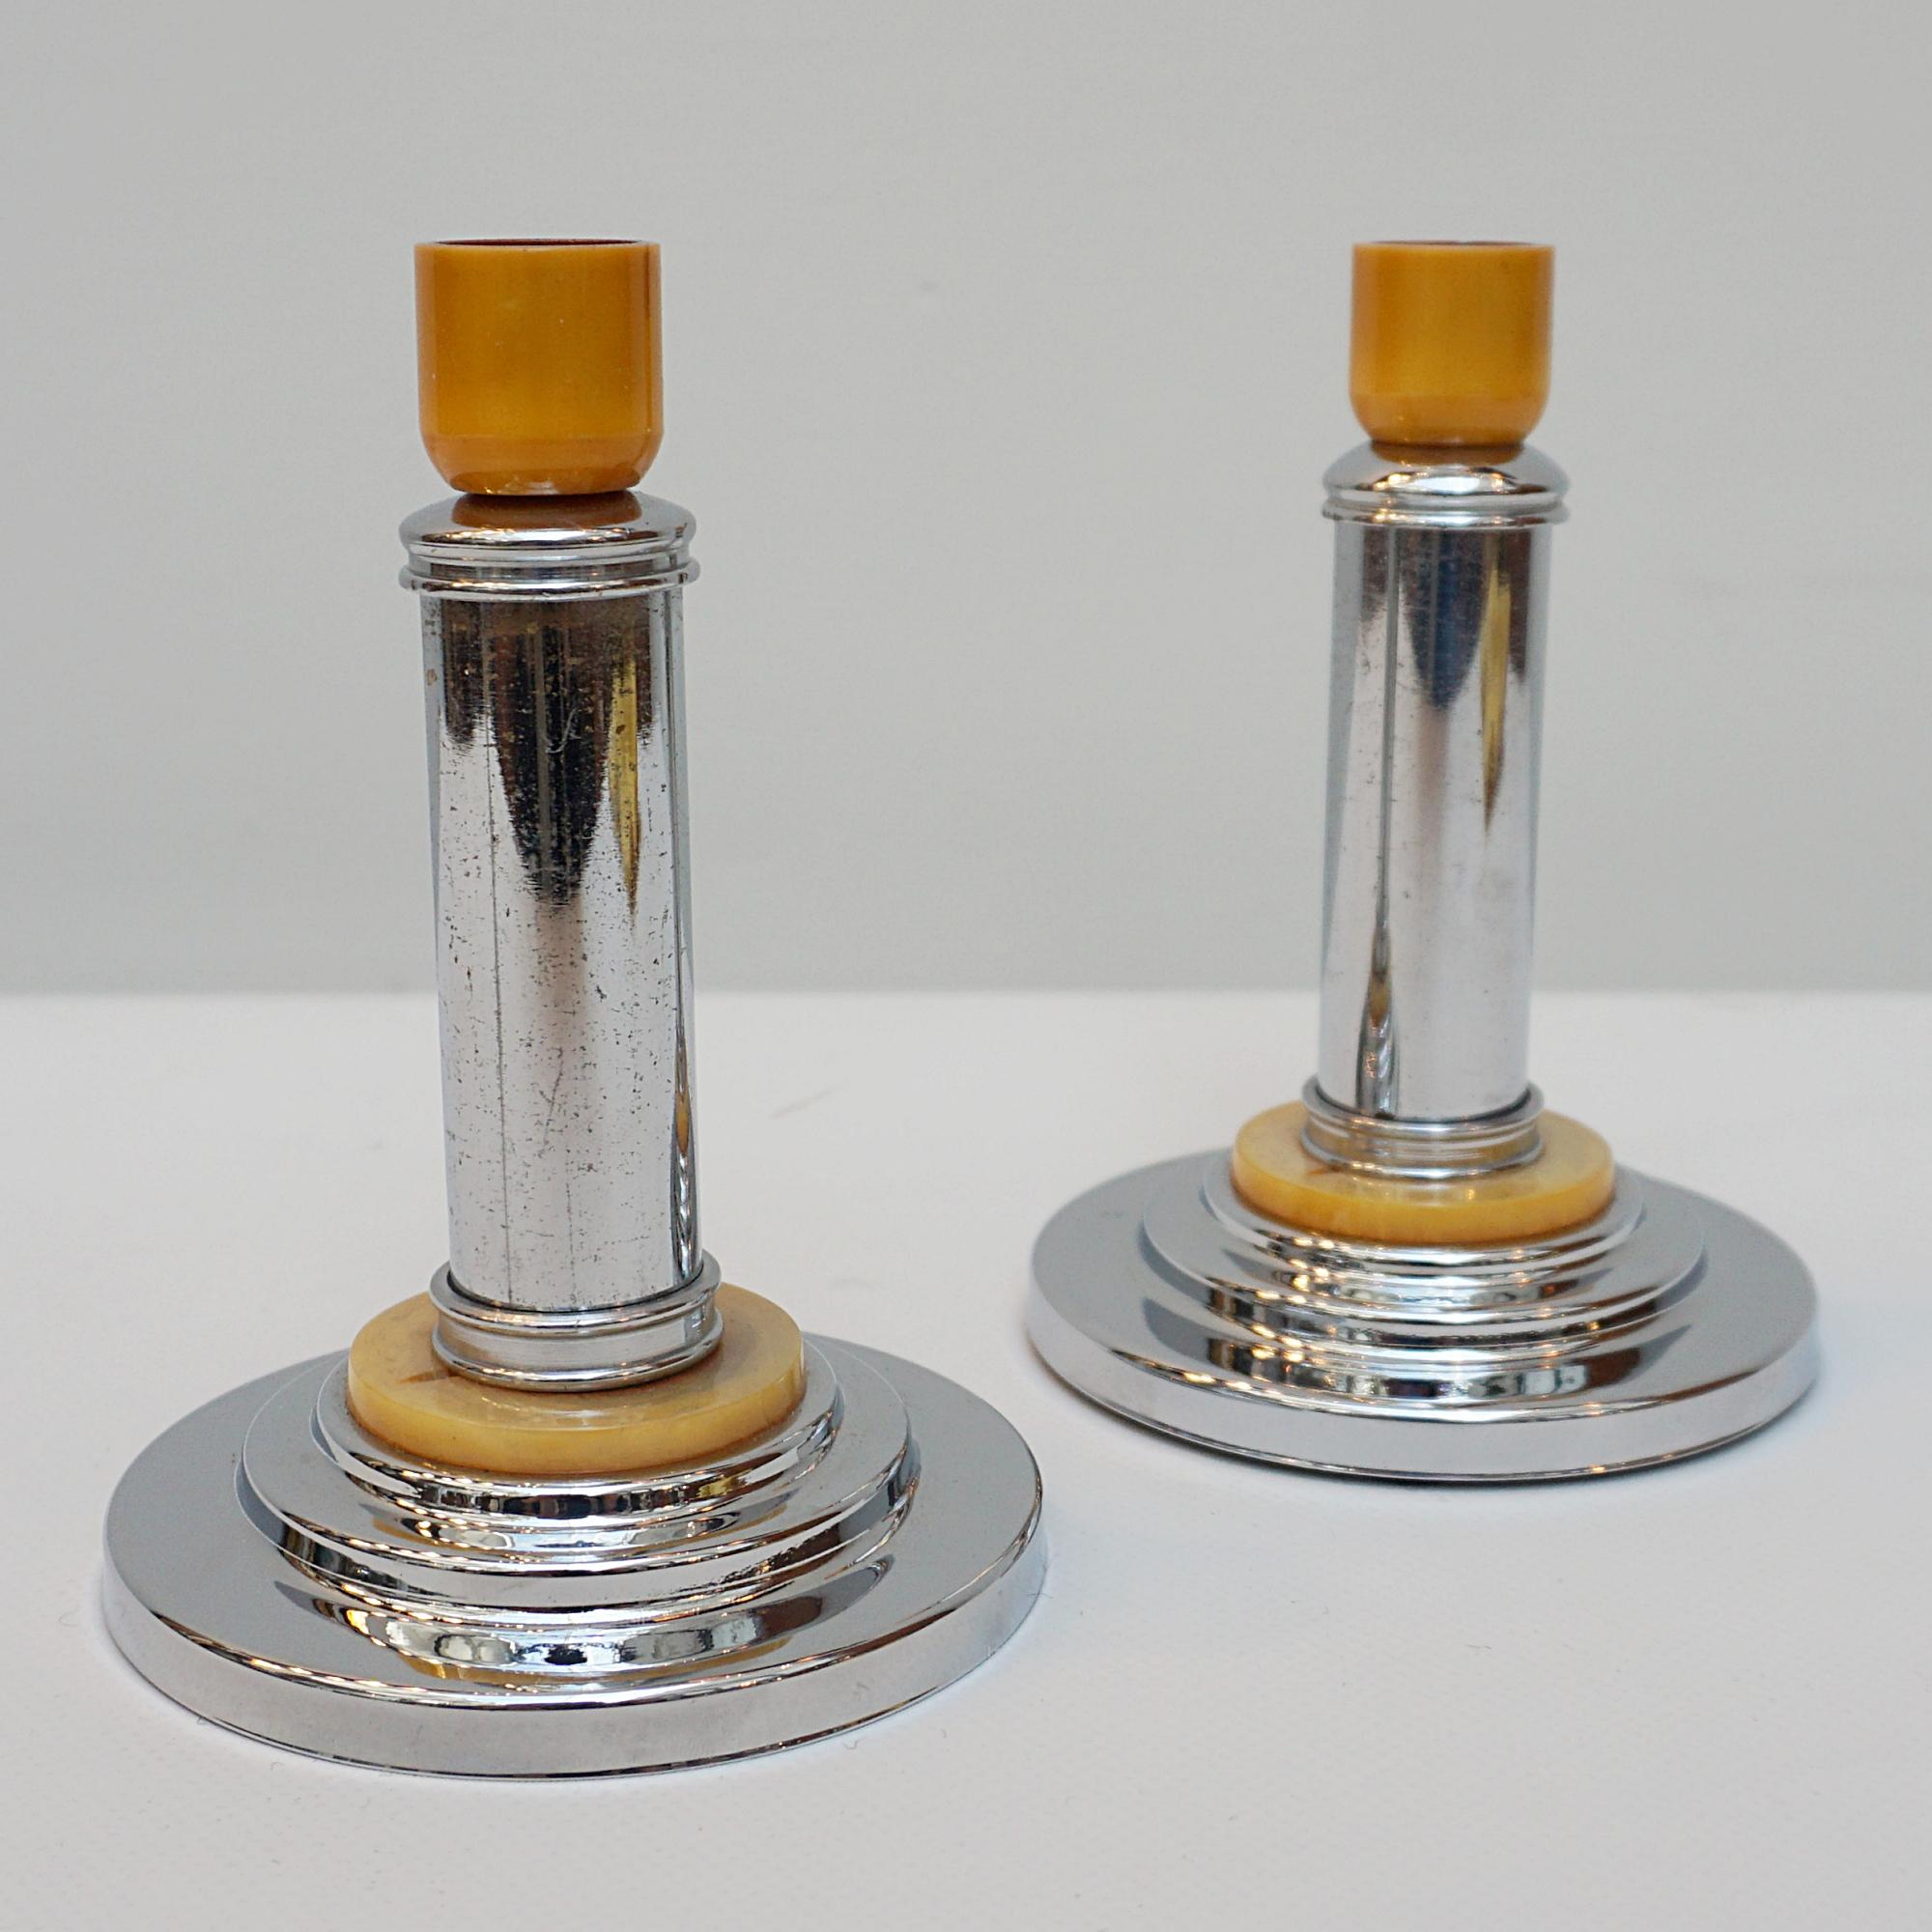 A Pair of Art Deco Style Bakelite Candlesticks In Good Condition For Sale In Forest Row, East Sussex